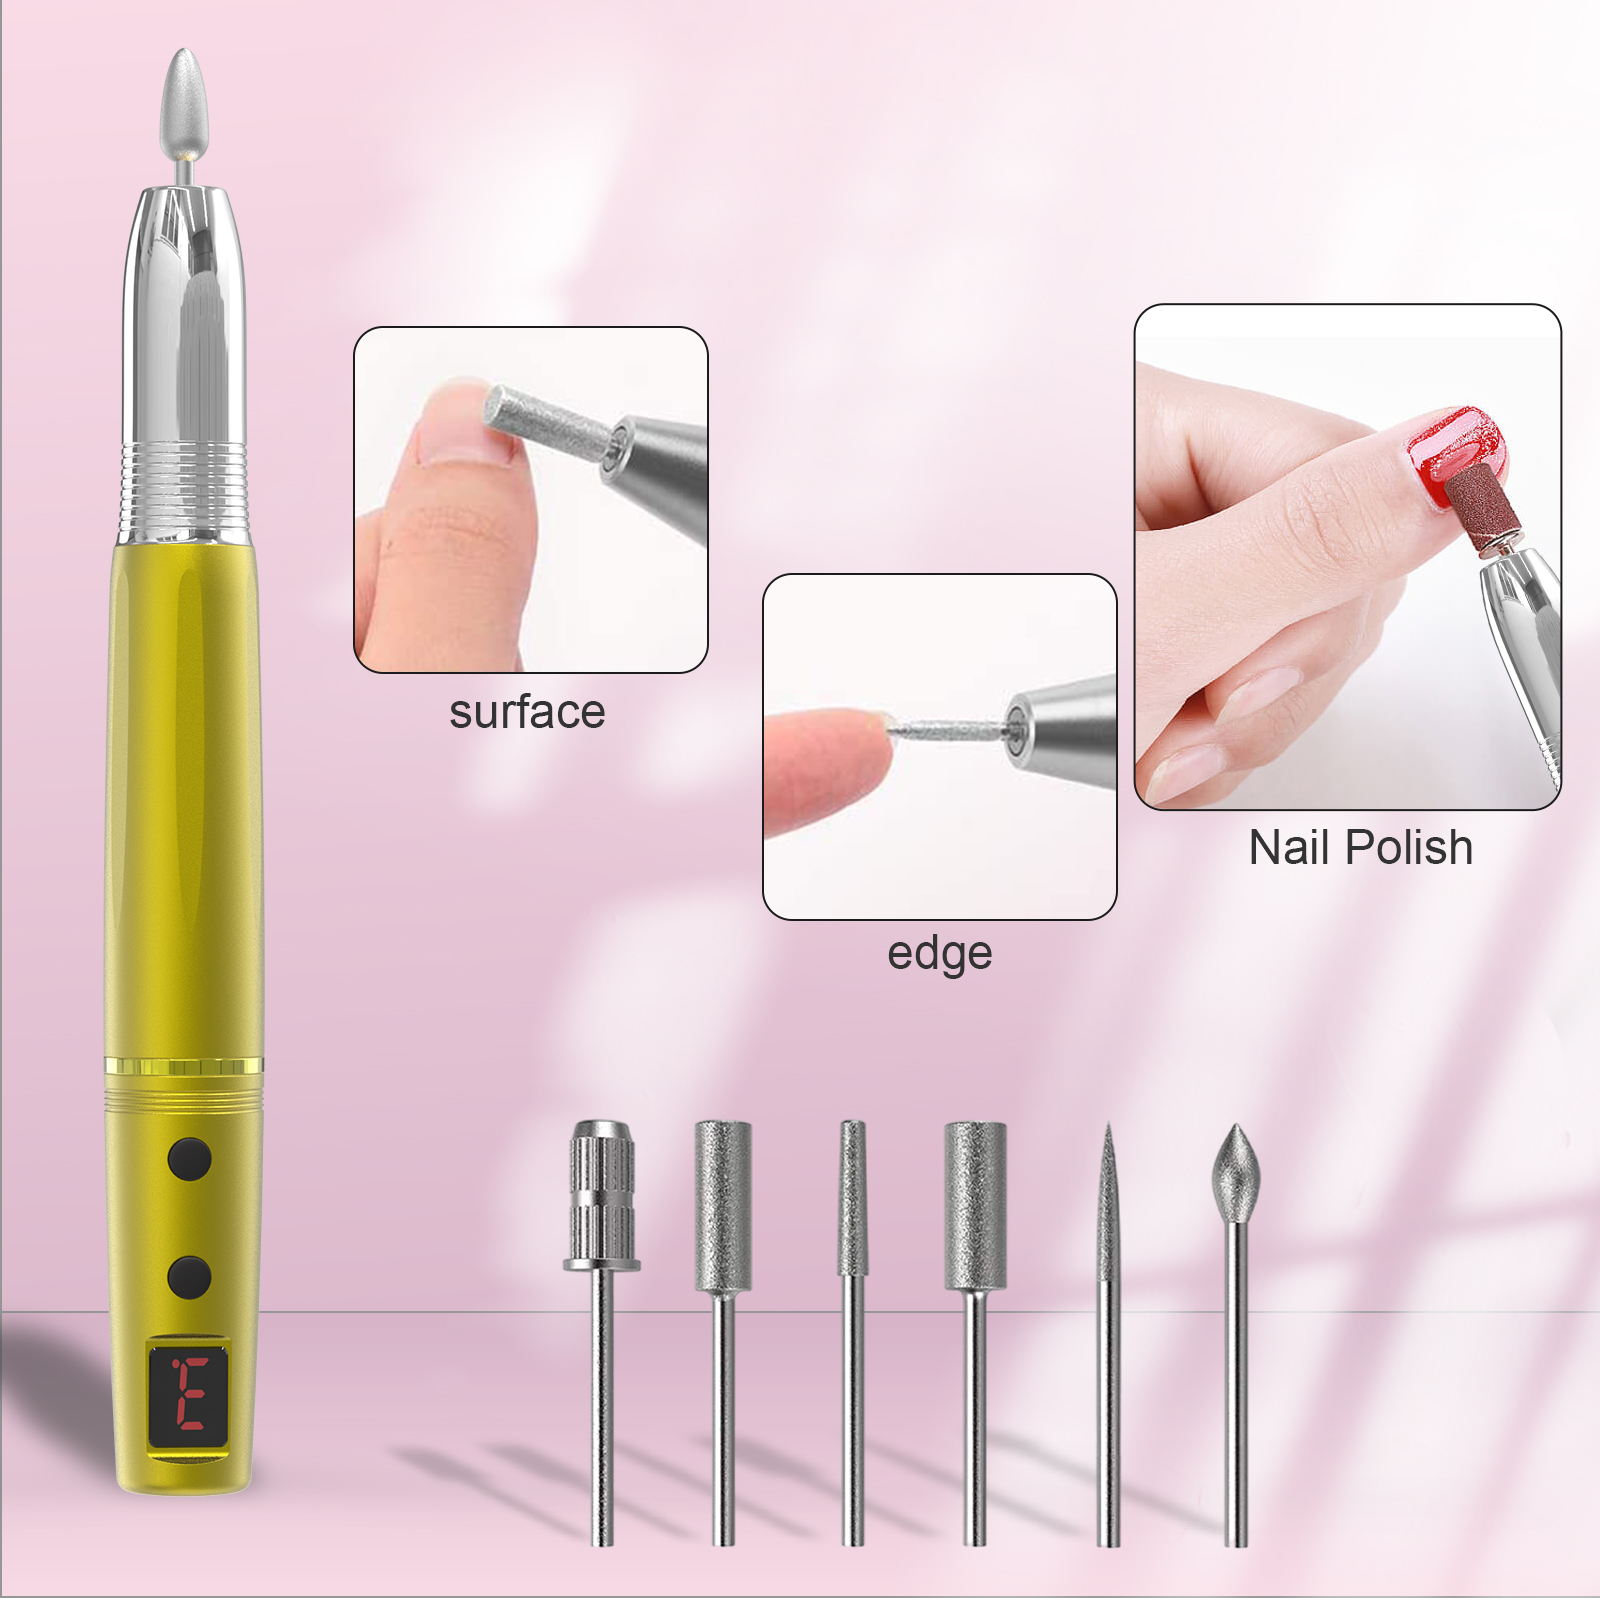 Portable Pink/Gold Nail Drill machine 15000 rpm electric Wireless Cordless Rechargeable Nail Drill Manufacturers, Portable Pink/Gold Nail Drill machine 15000 rpm electric Wireless Cordless Rechargeable Nail Drill Factory, Supply Portable Pink/Gold Nail Drill machine 15000 rpm electric Wireless Cordless Rechargeable Nail Drill